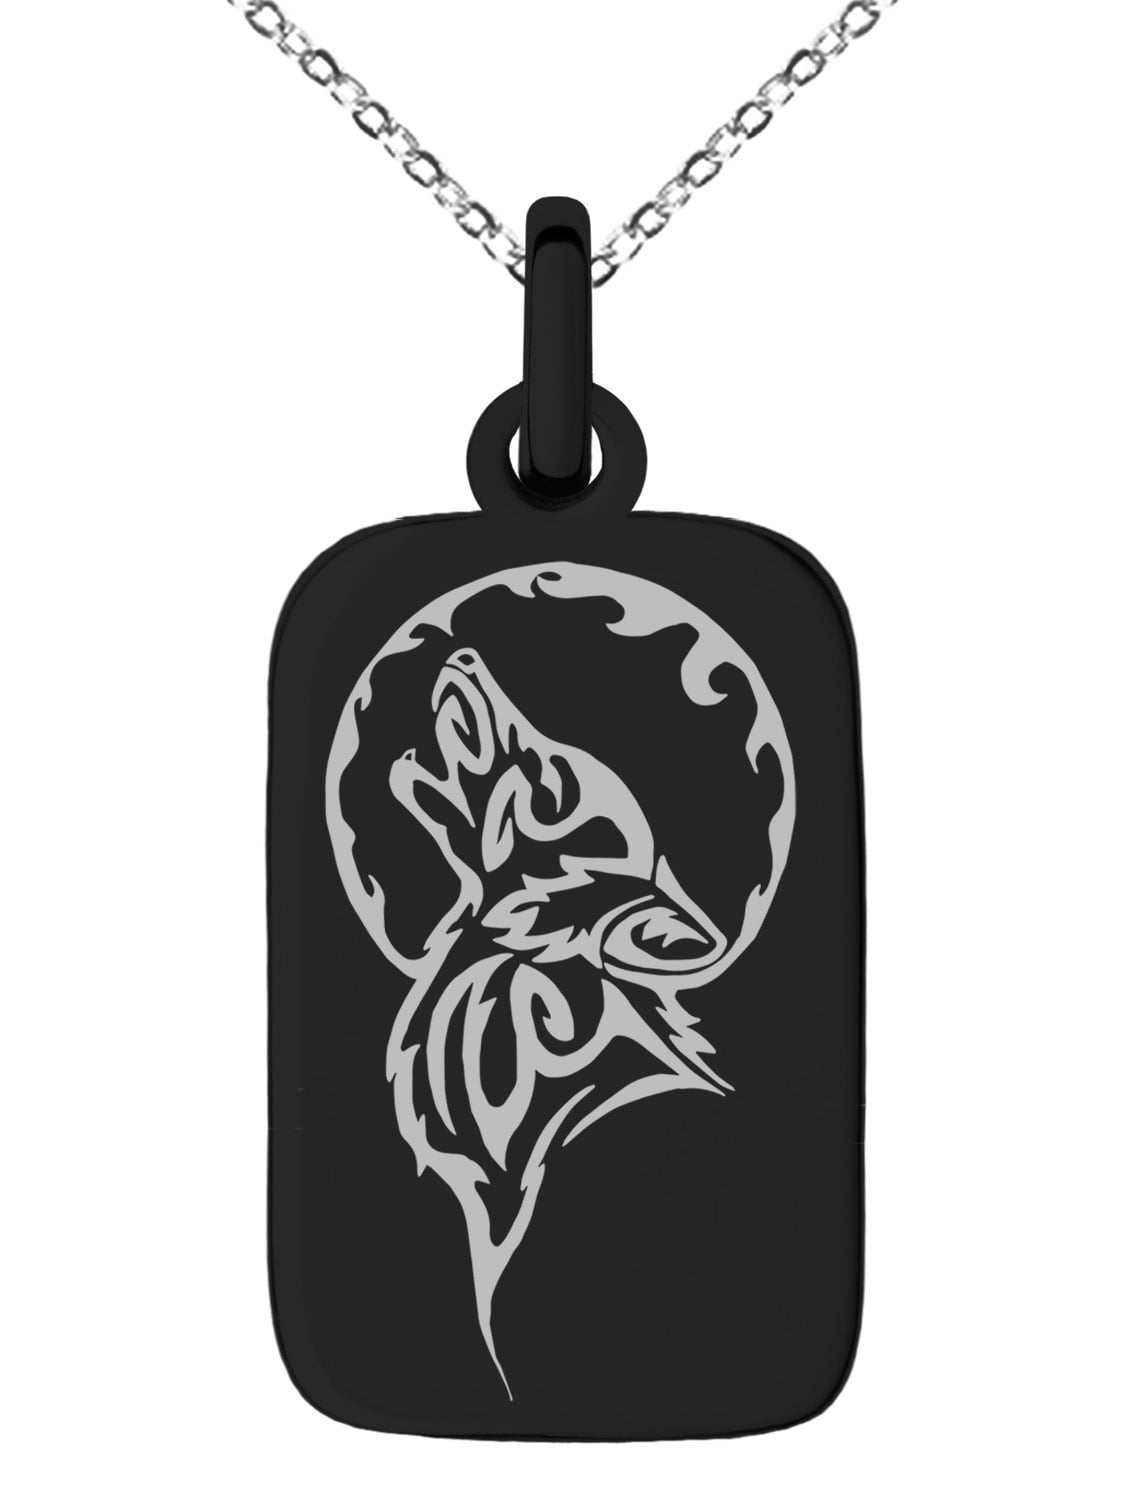 Wolf Military Dog Tag Pendant Necklaces for Men Team Fight Jewelry with  Stainless Steel Metal Gifts